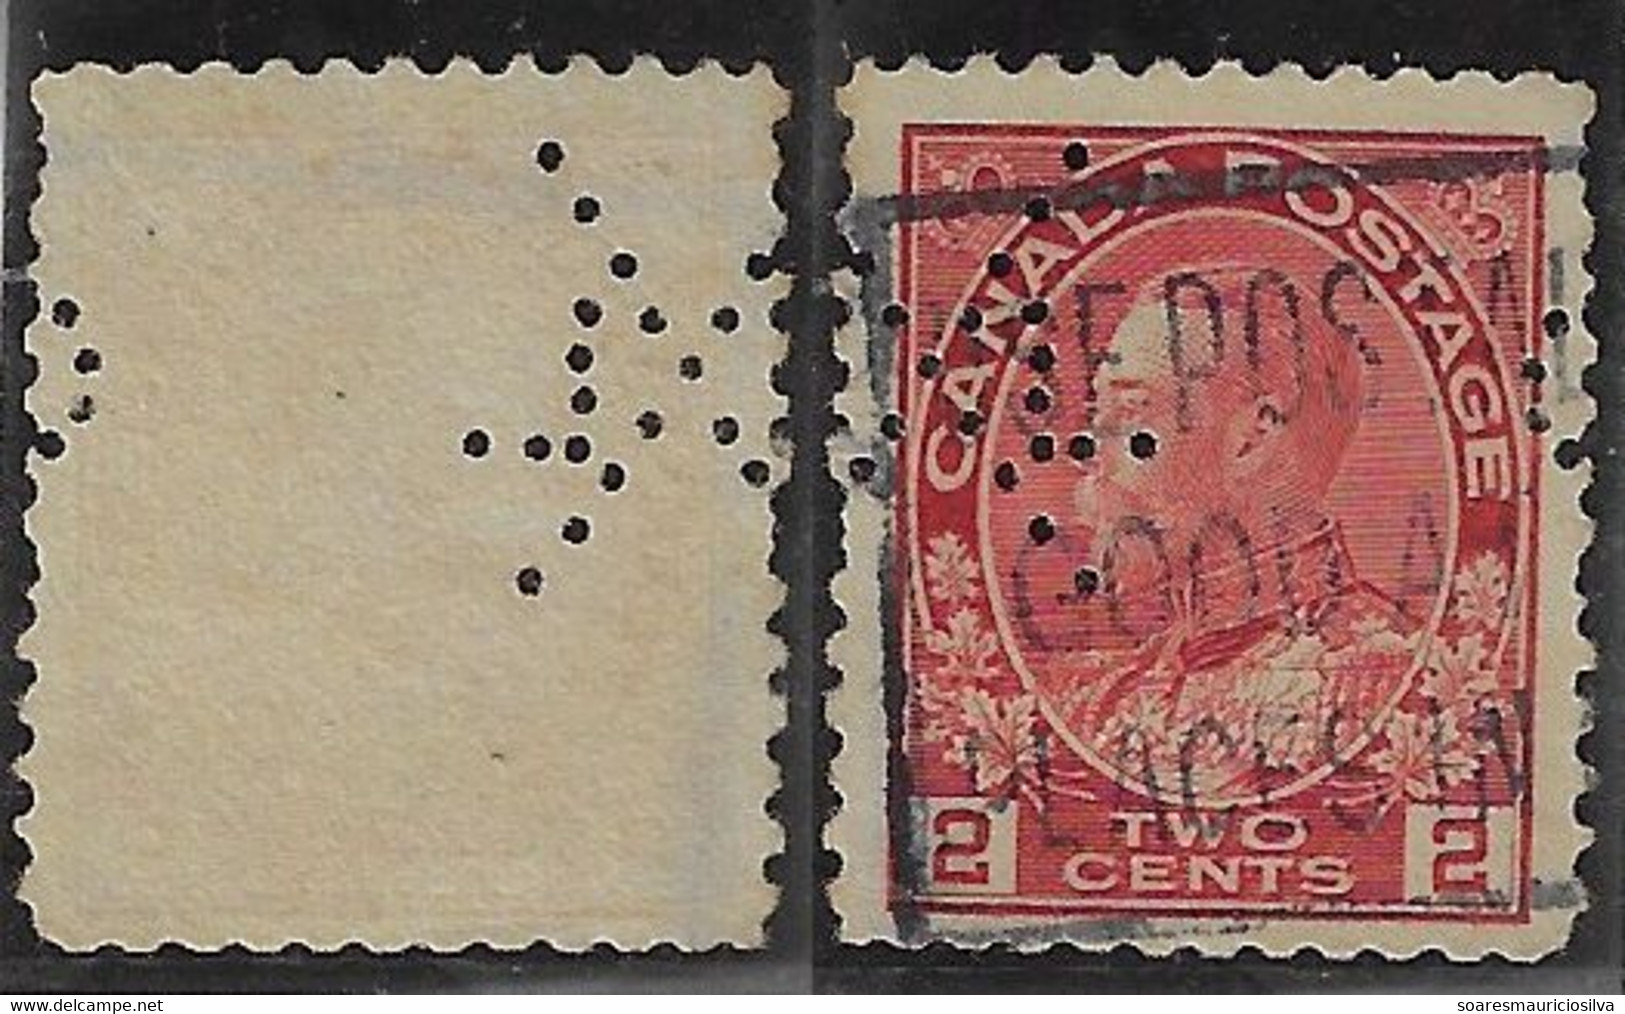 Canada 1917 / 1937 Stamp With Perfin CXL By Canadian Explosives Company From Montreal Lochung Perfore - Perforadas